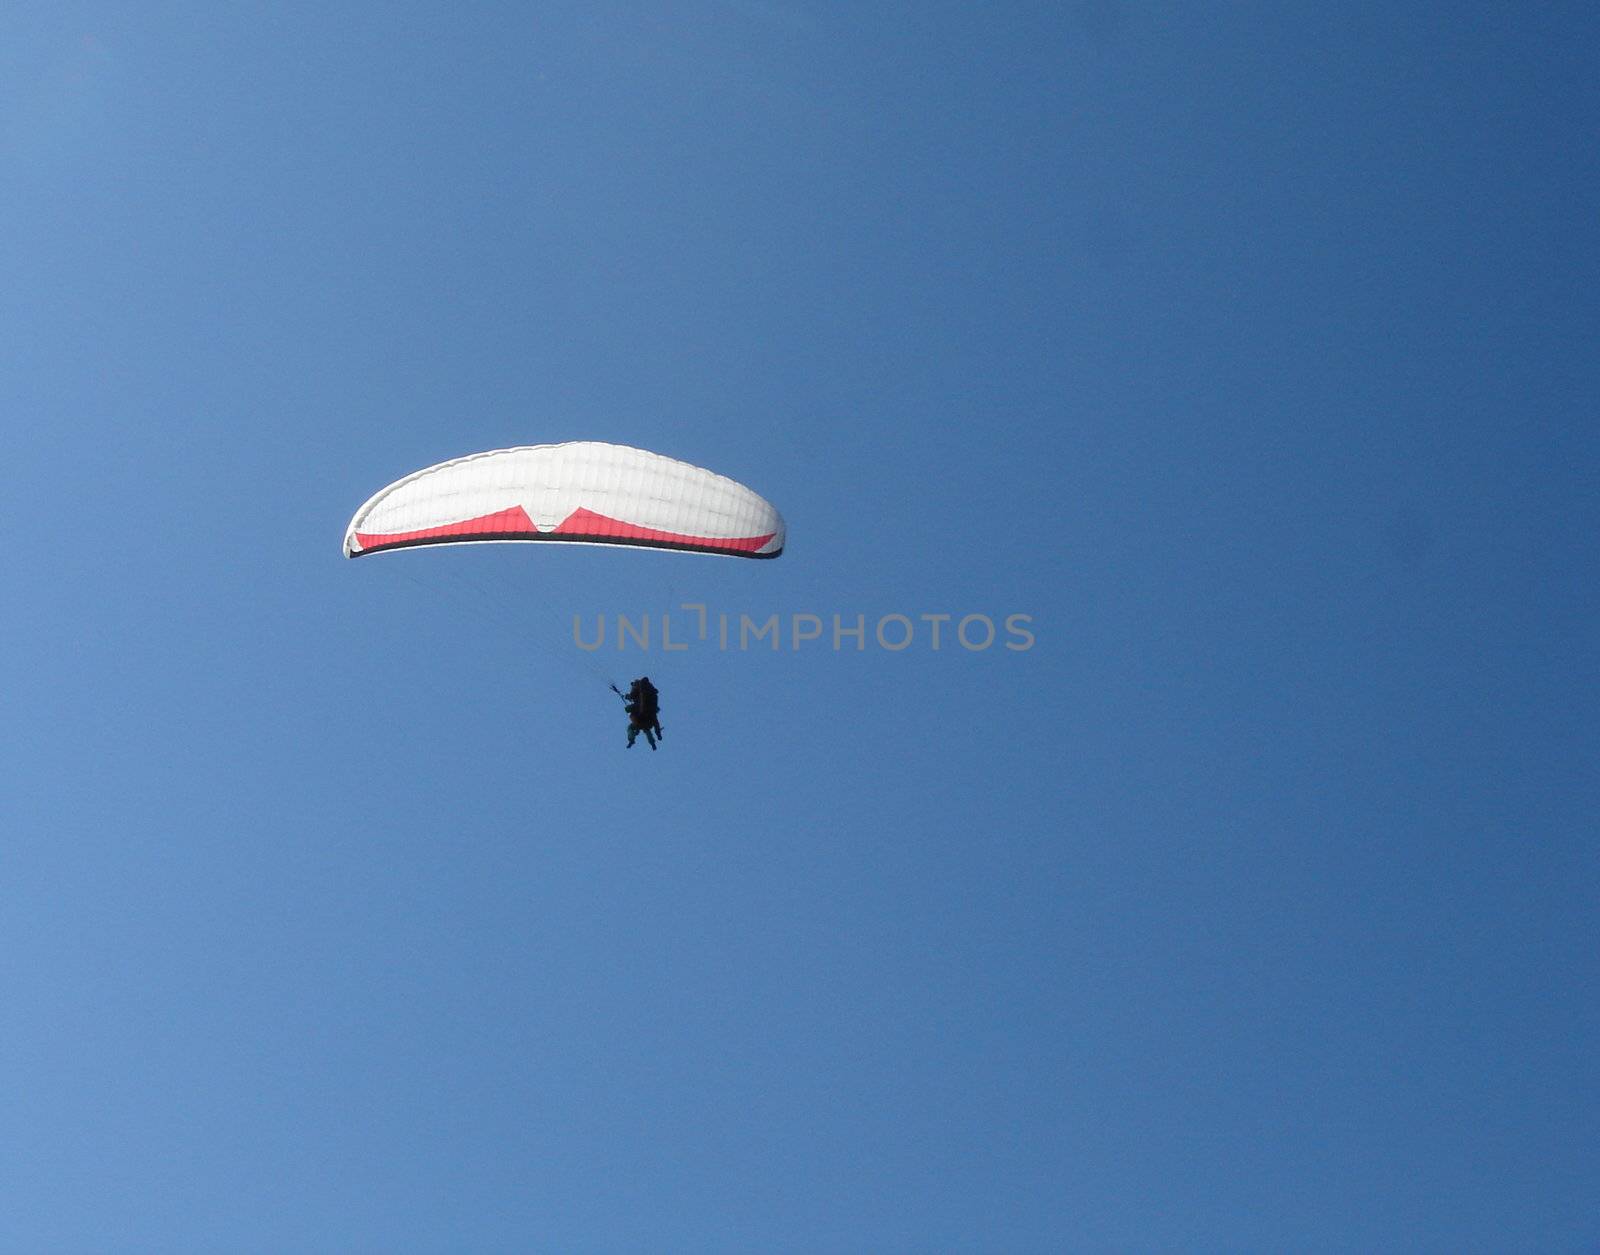 Small paragliders with white veil in deep blue sky